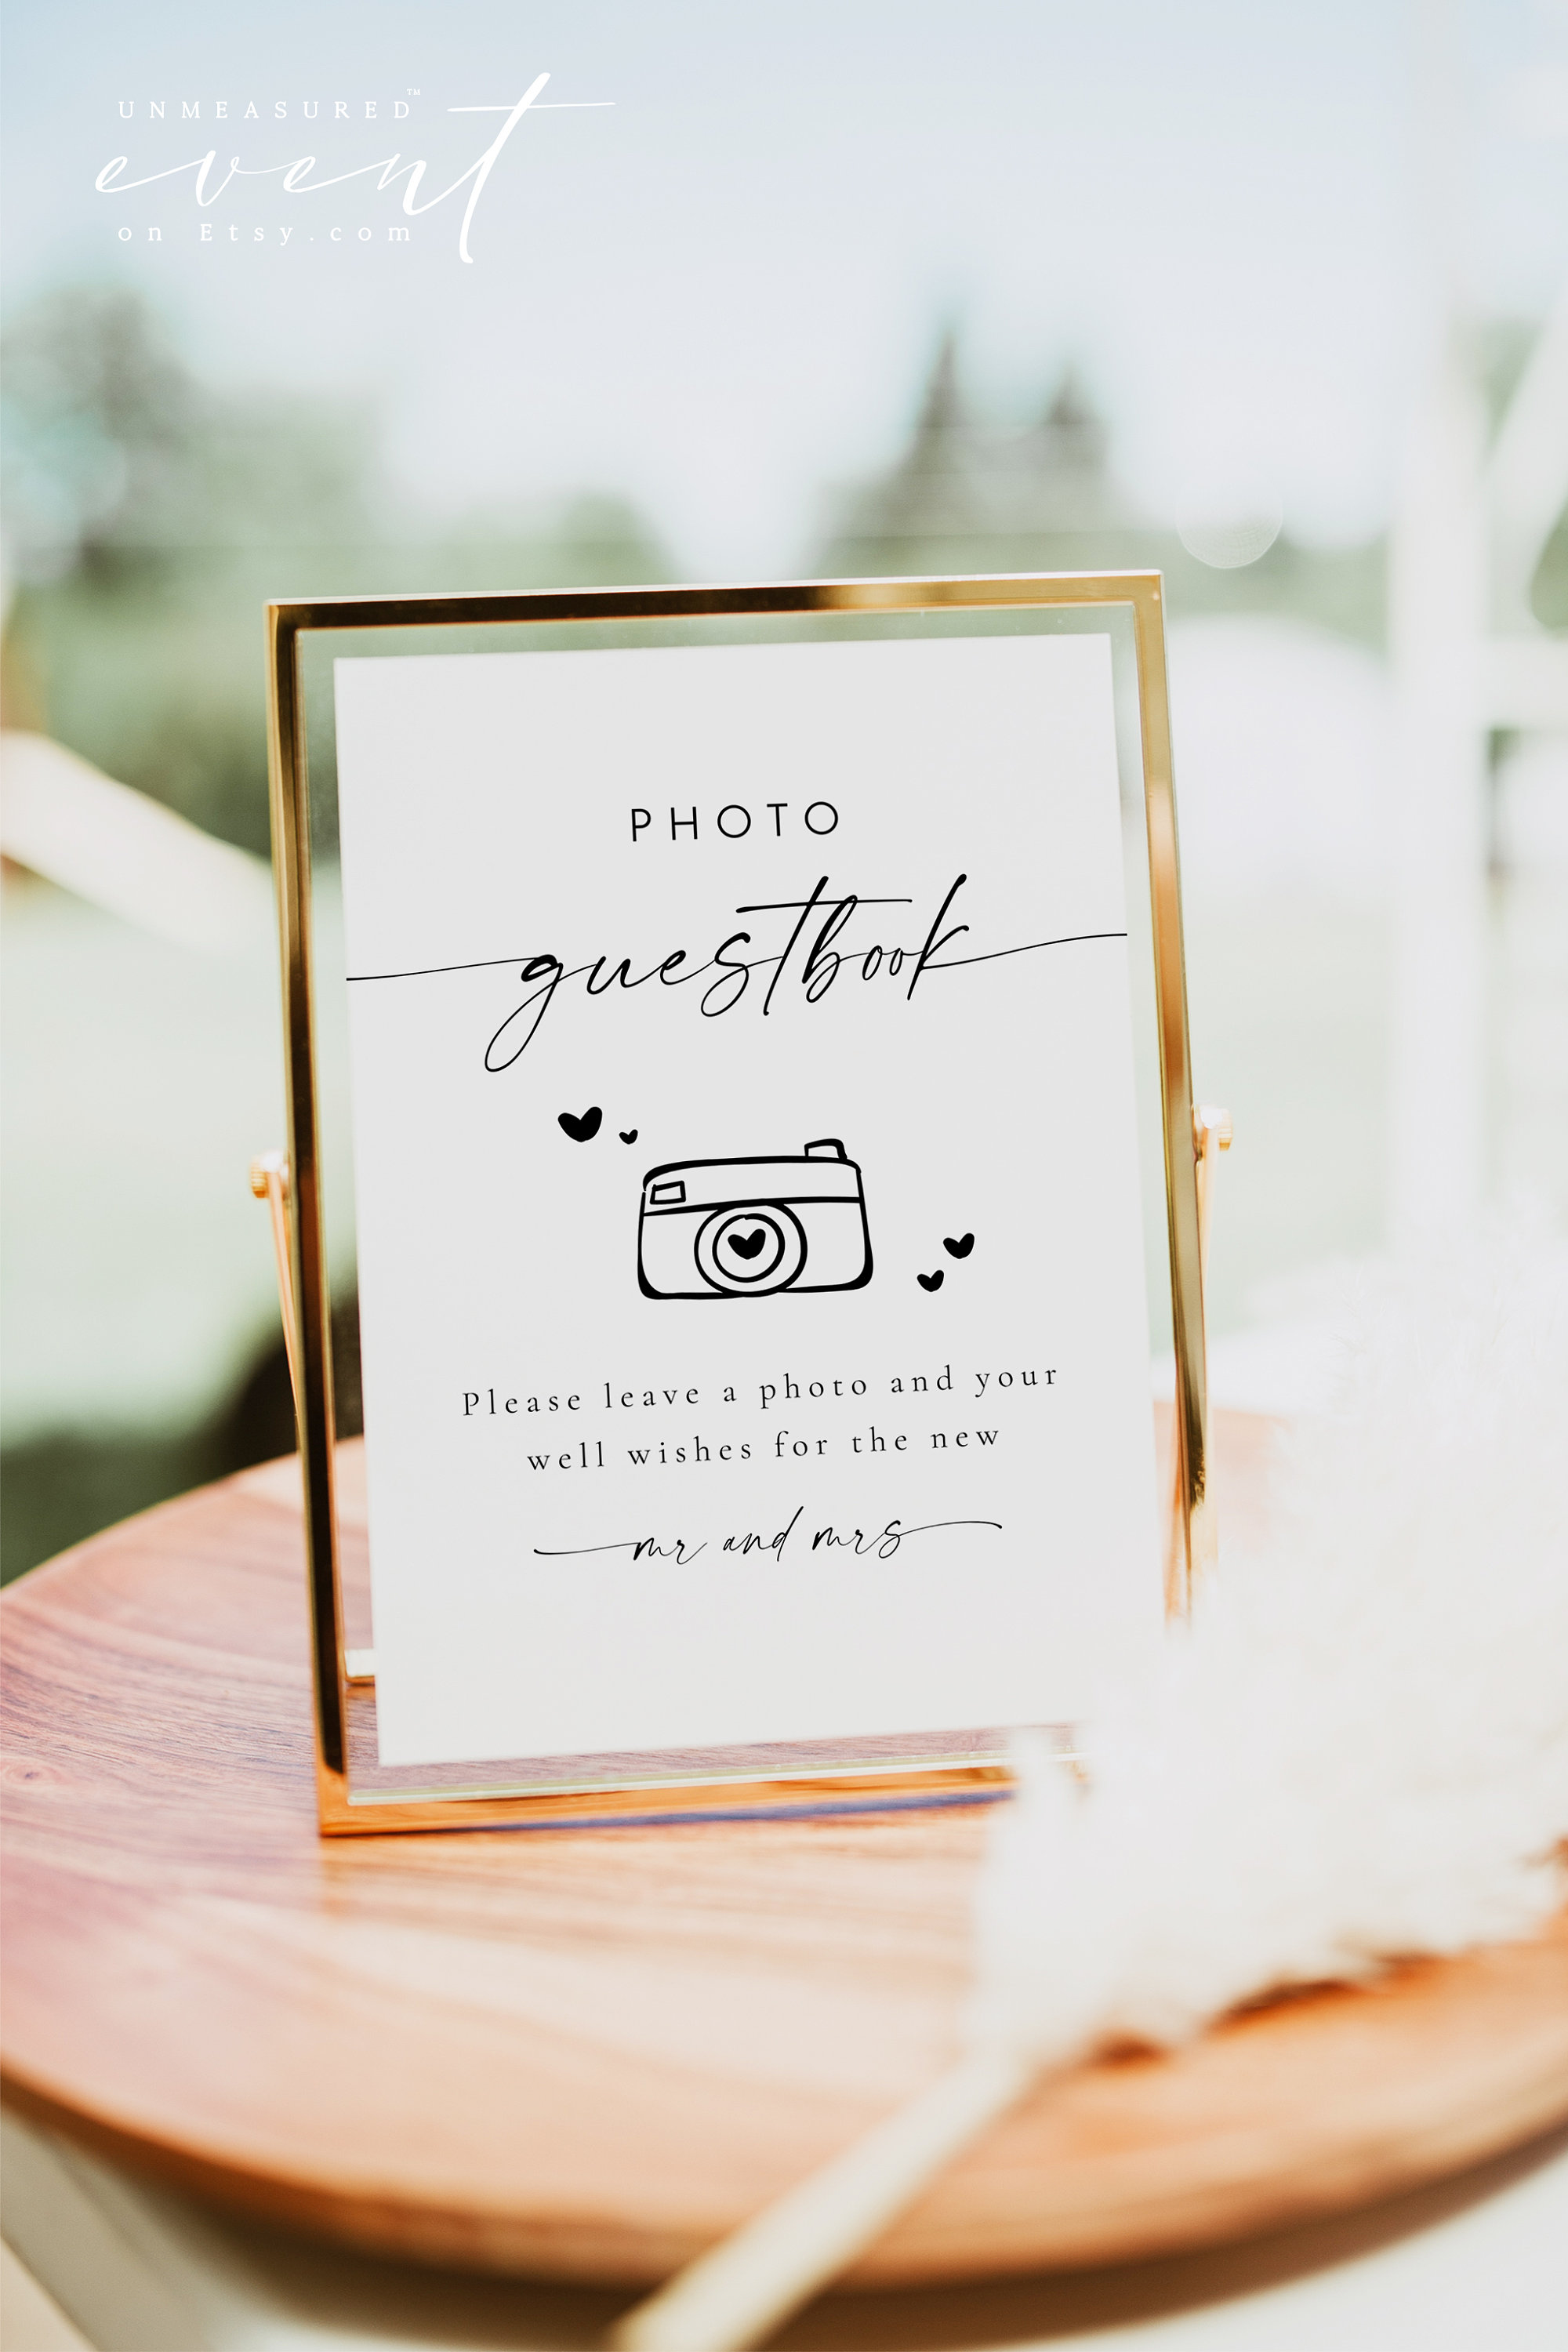 Magical Maui Wedding Filled With Color + Whimsy  Polaroid guest book, Wedding  guest book, Polaroid guest book sign